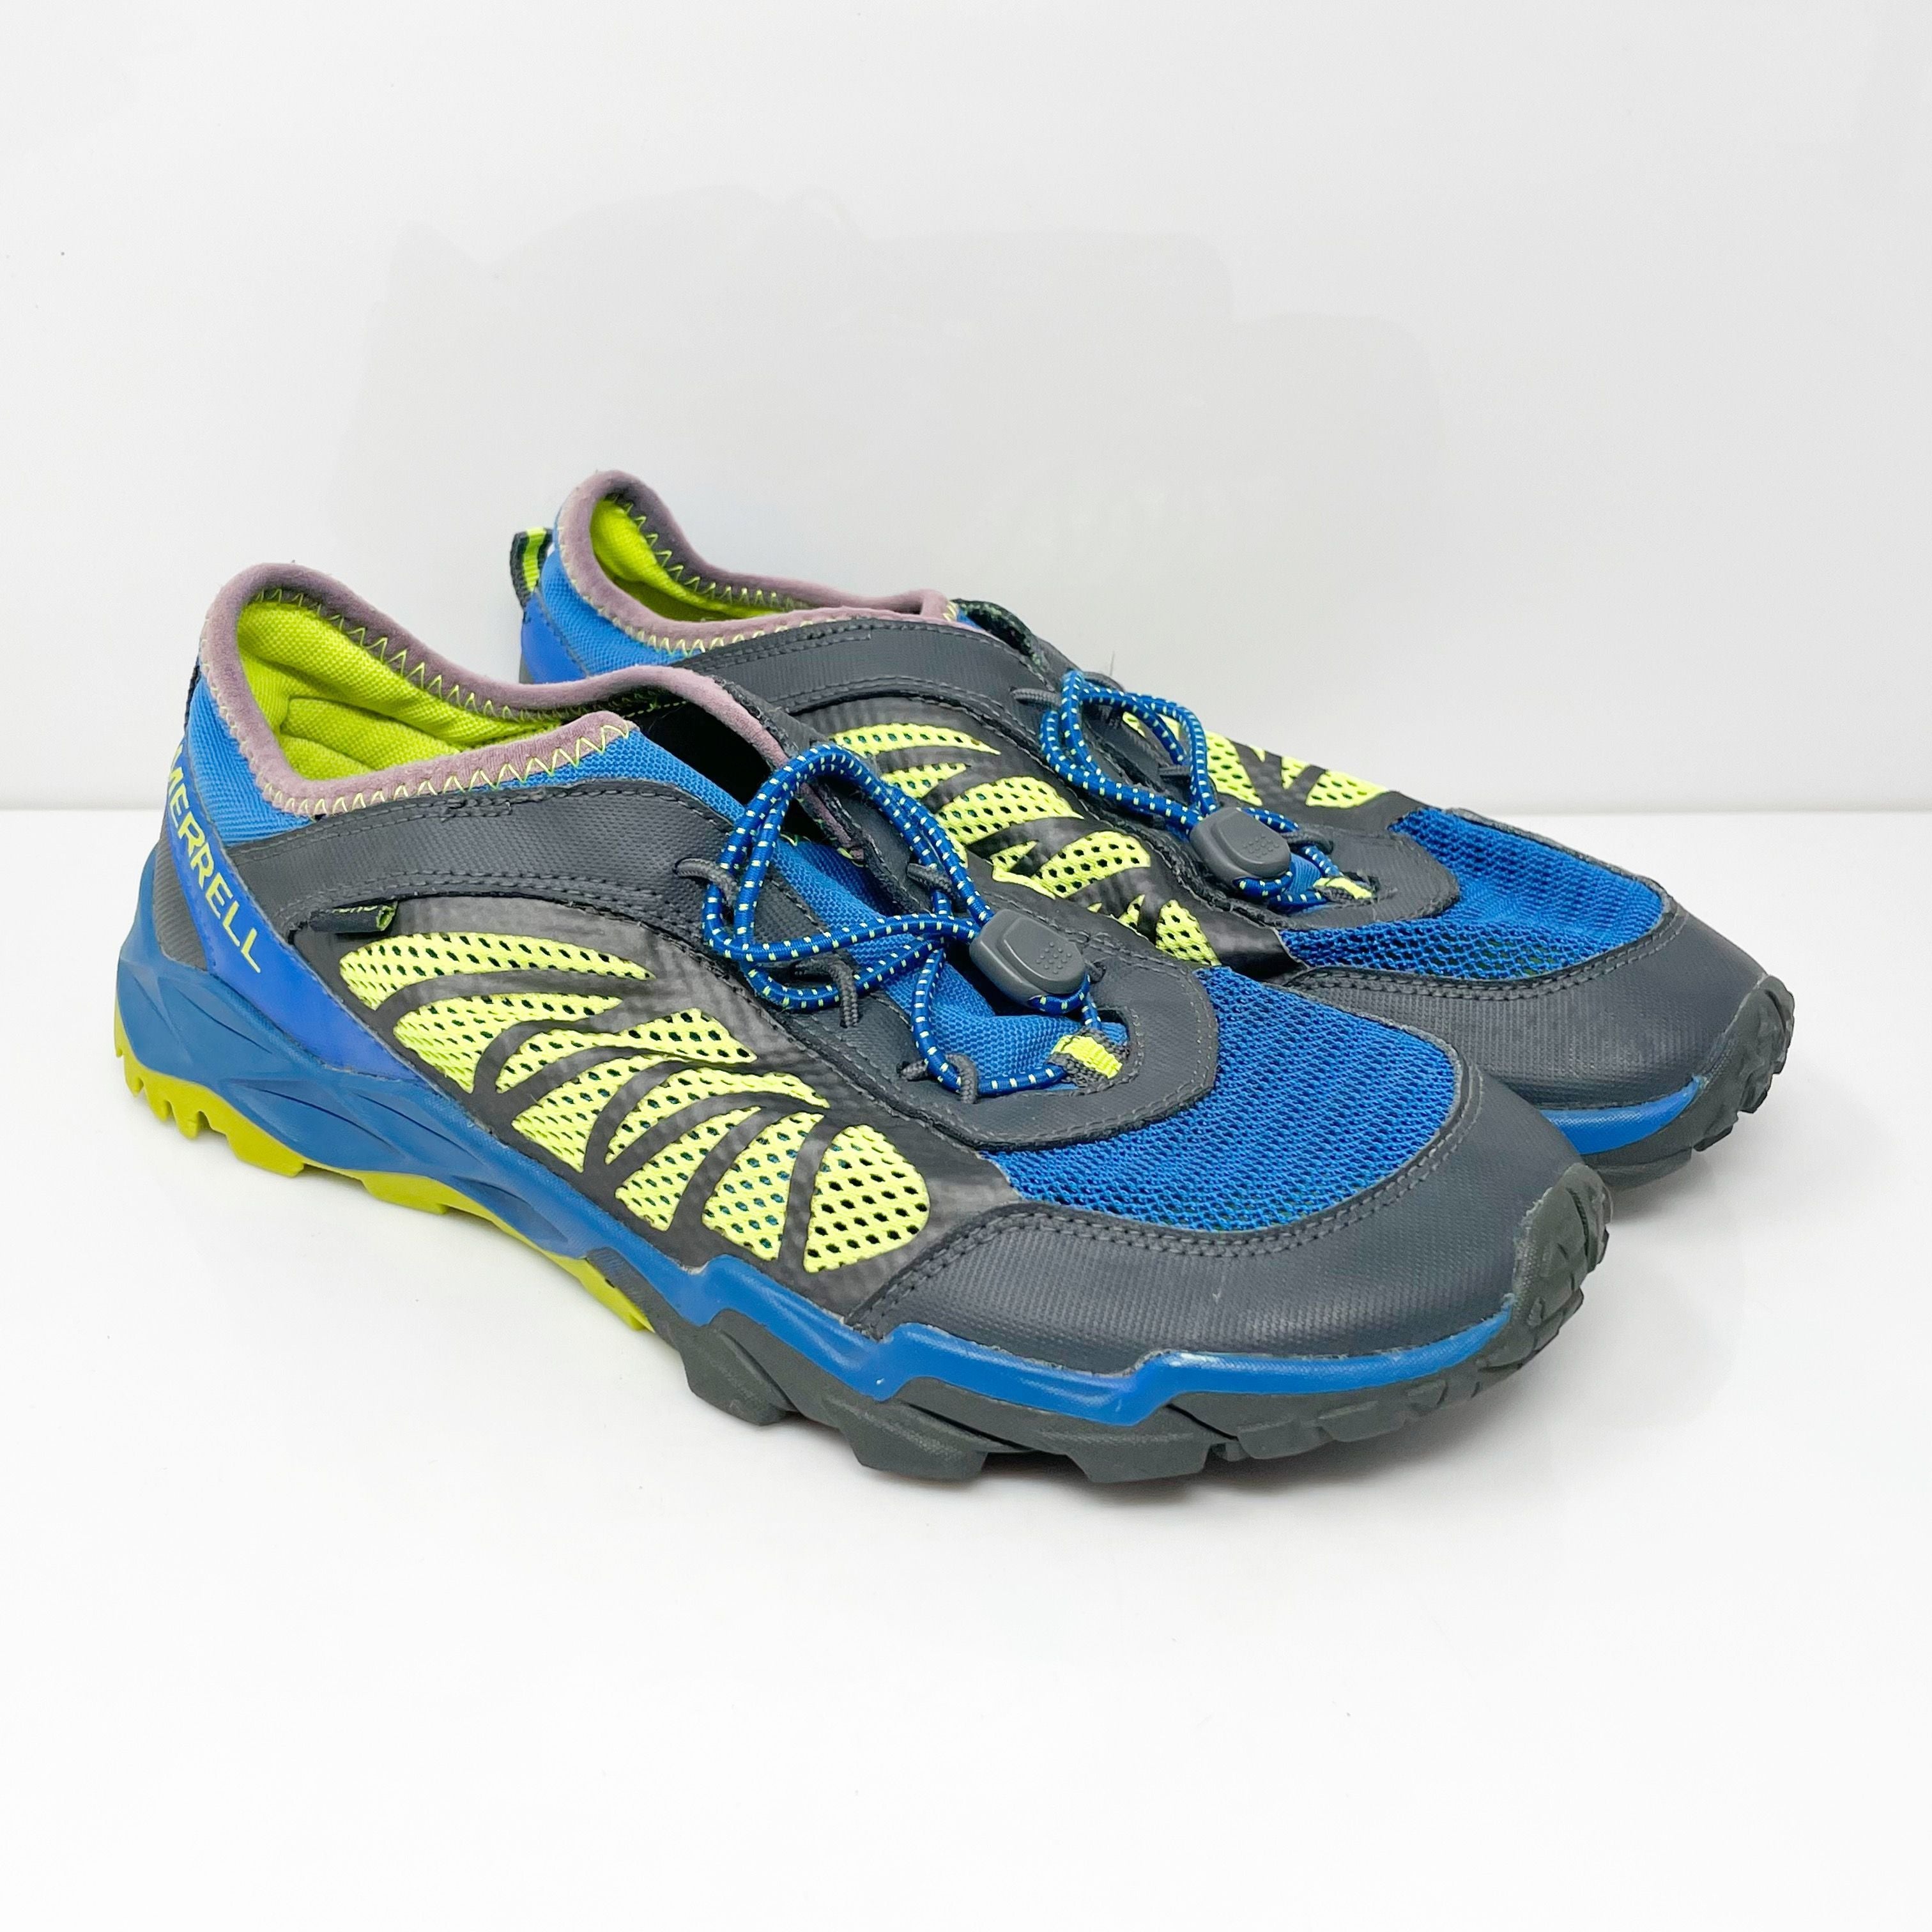 Merrell Boys Hydro Run 2.0 MY56506 Blue Hiking Shoes Sneakers Size 5.5 ...